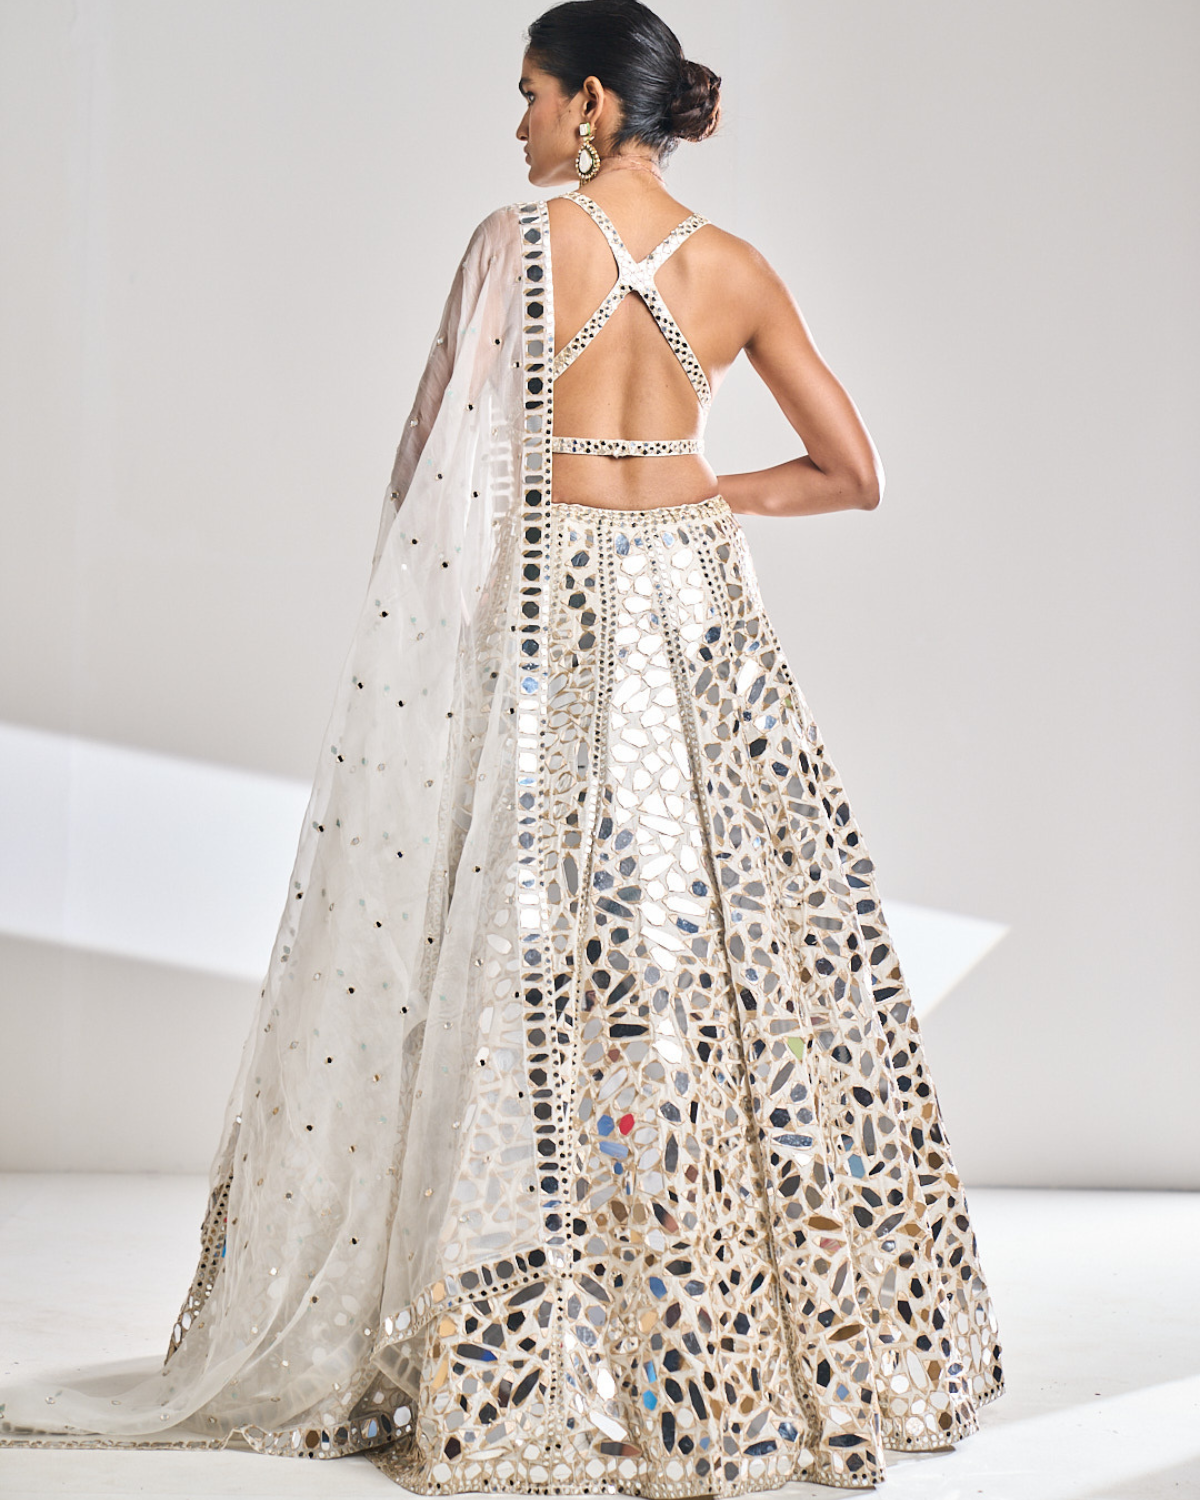 DUSTY BROWN CLASSIC LEHENGA SET WITH ALL OVER IVORY PATTERNED EMBROIDERY  PAIRED WITH A MATCHING DUPATTA AND SILVER AND IVORY HAND EMBROIDERED  DETAILS. - Seasons India